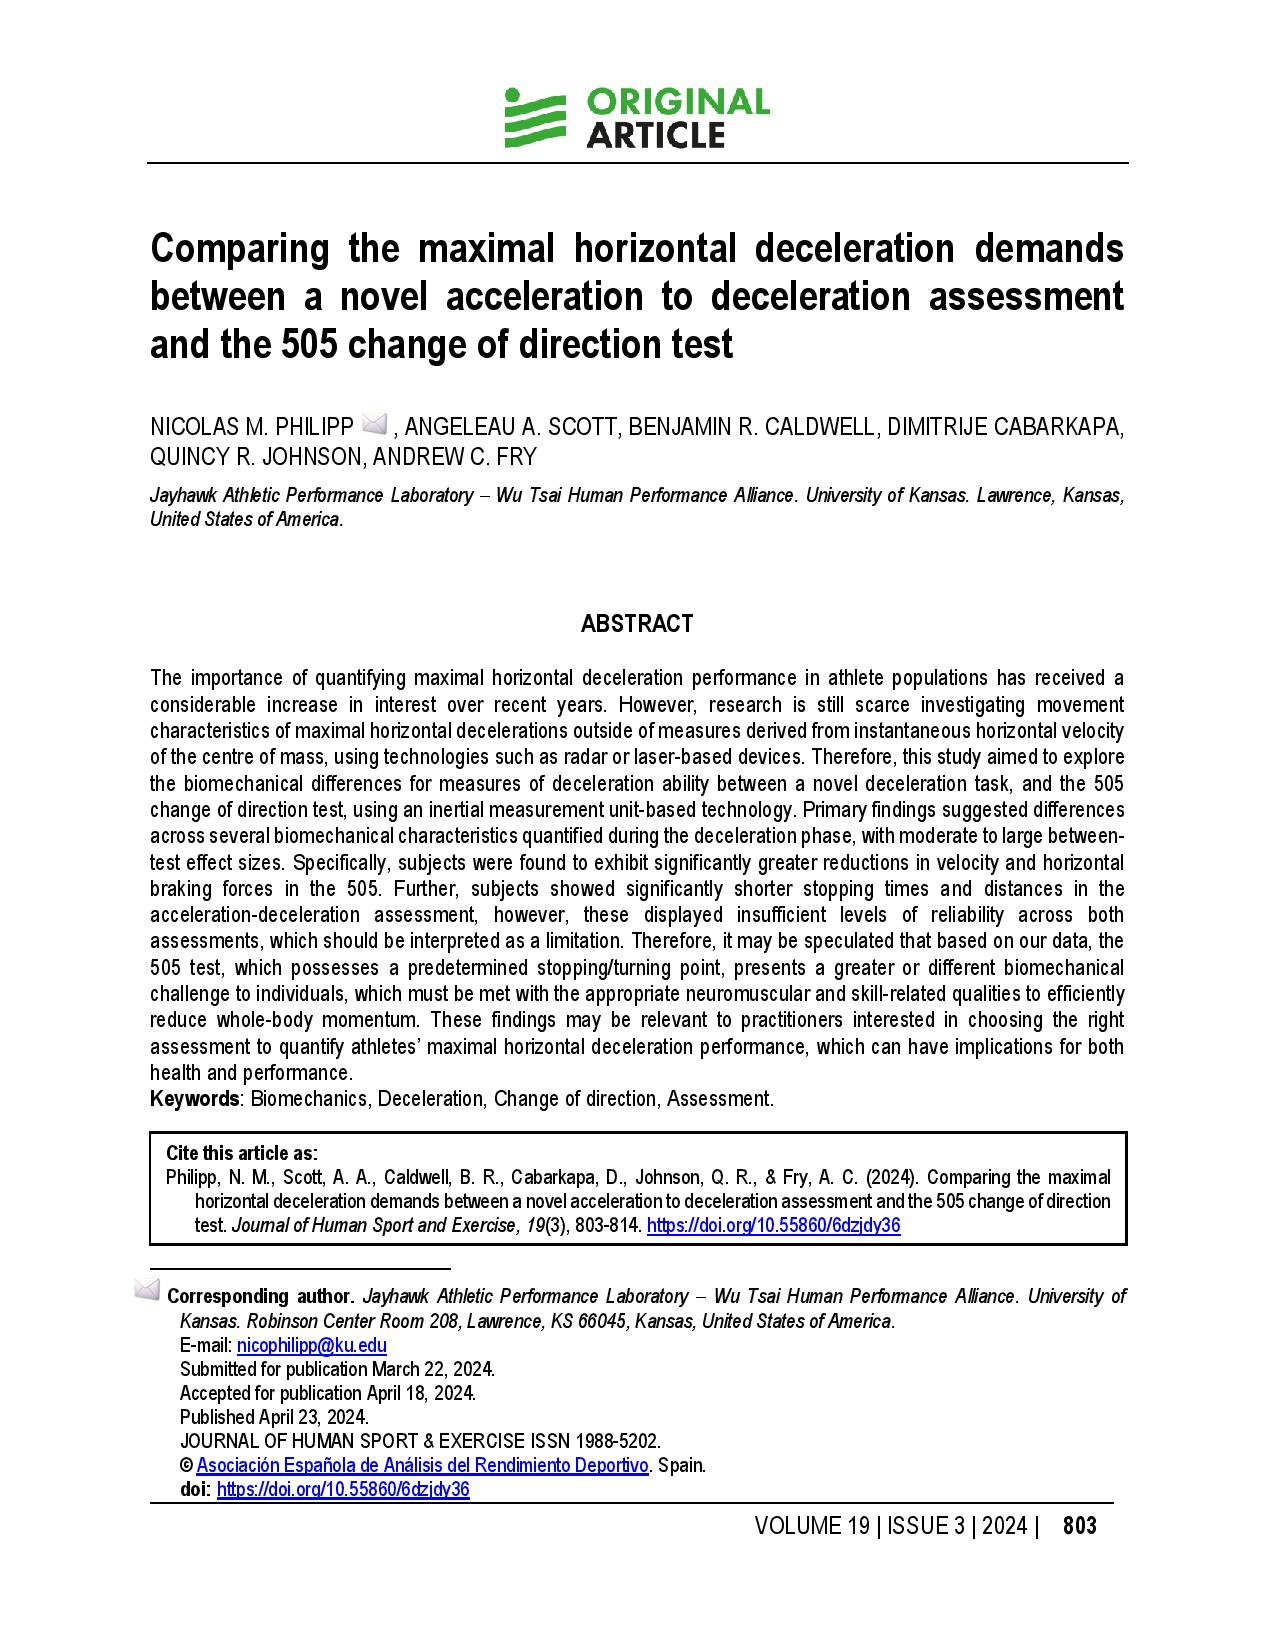 Comparing the maximal horizontal deceleration demands between a novel acceleration to deceleration assessment and the 505 change of direction test